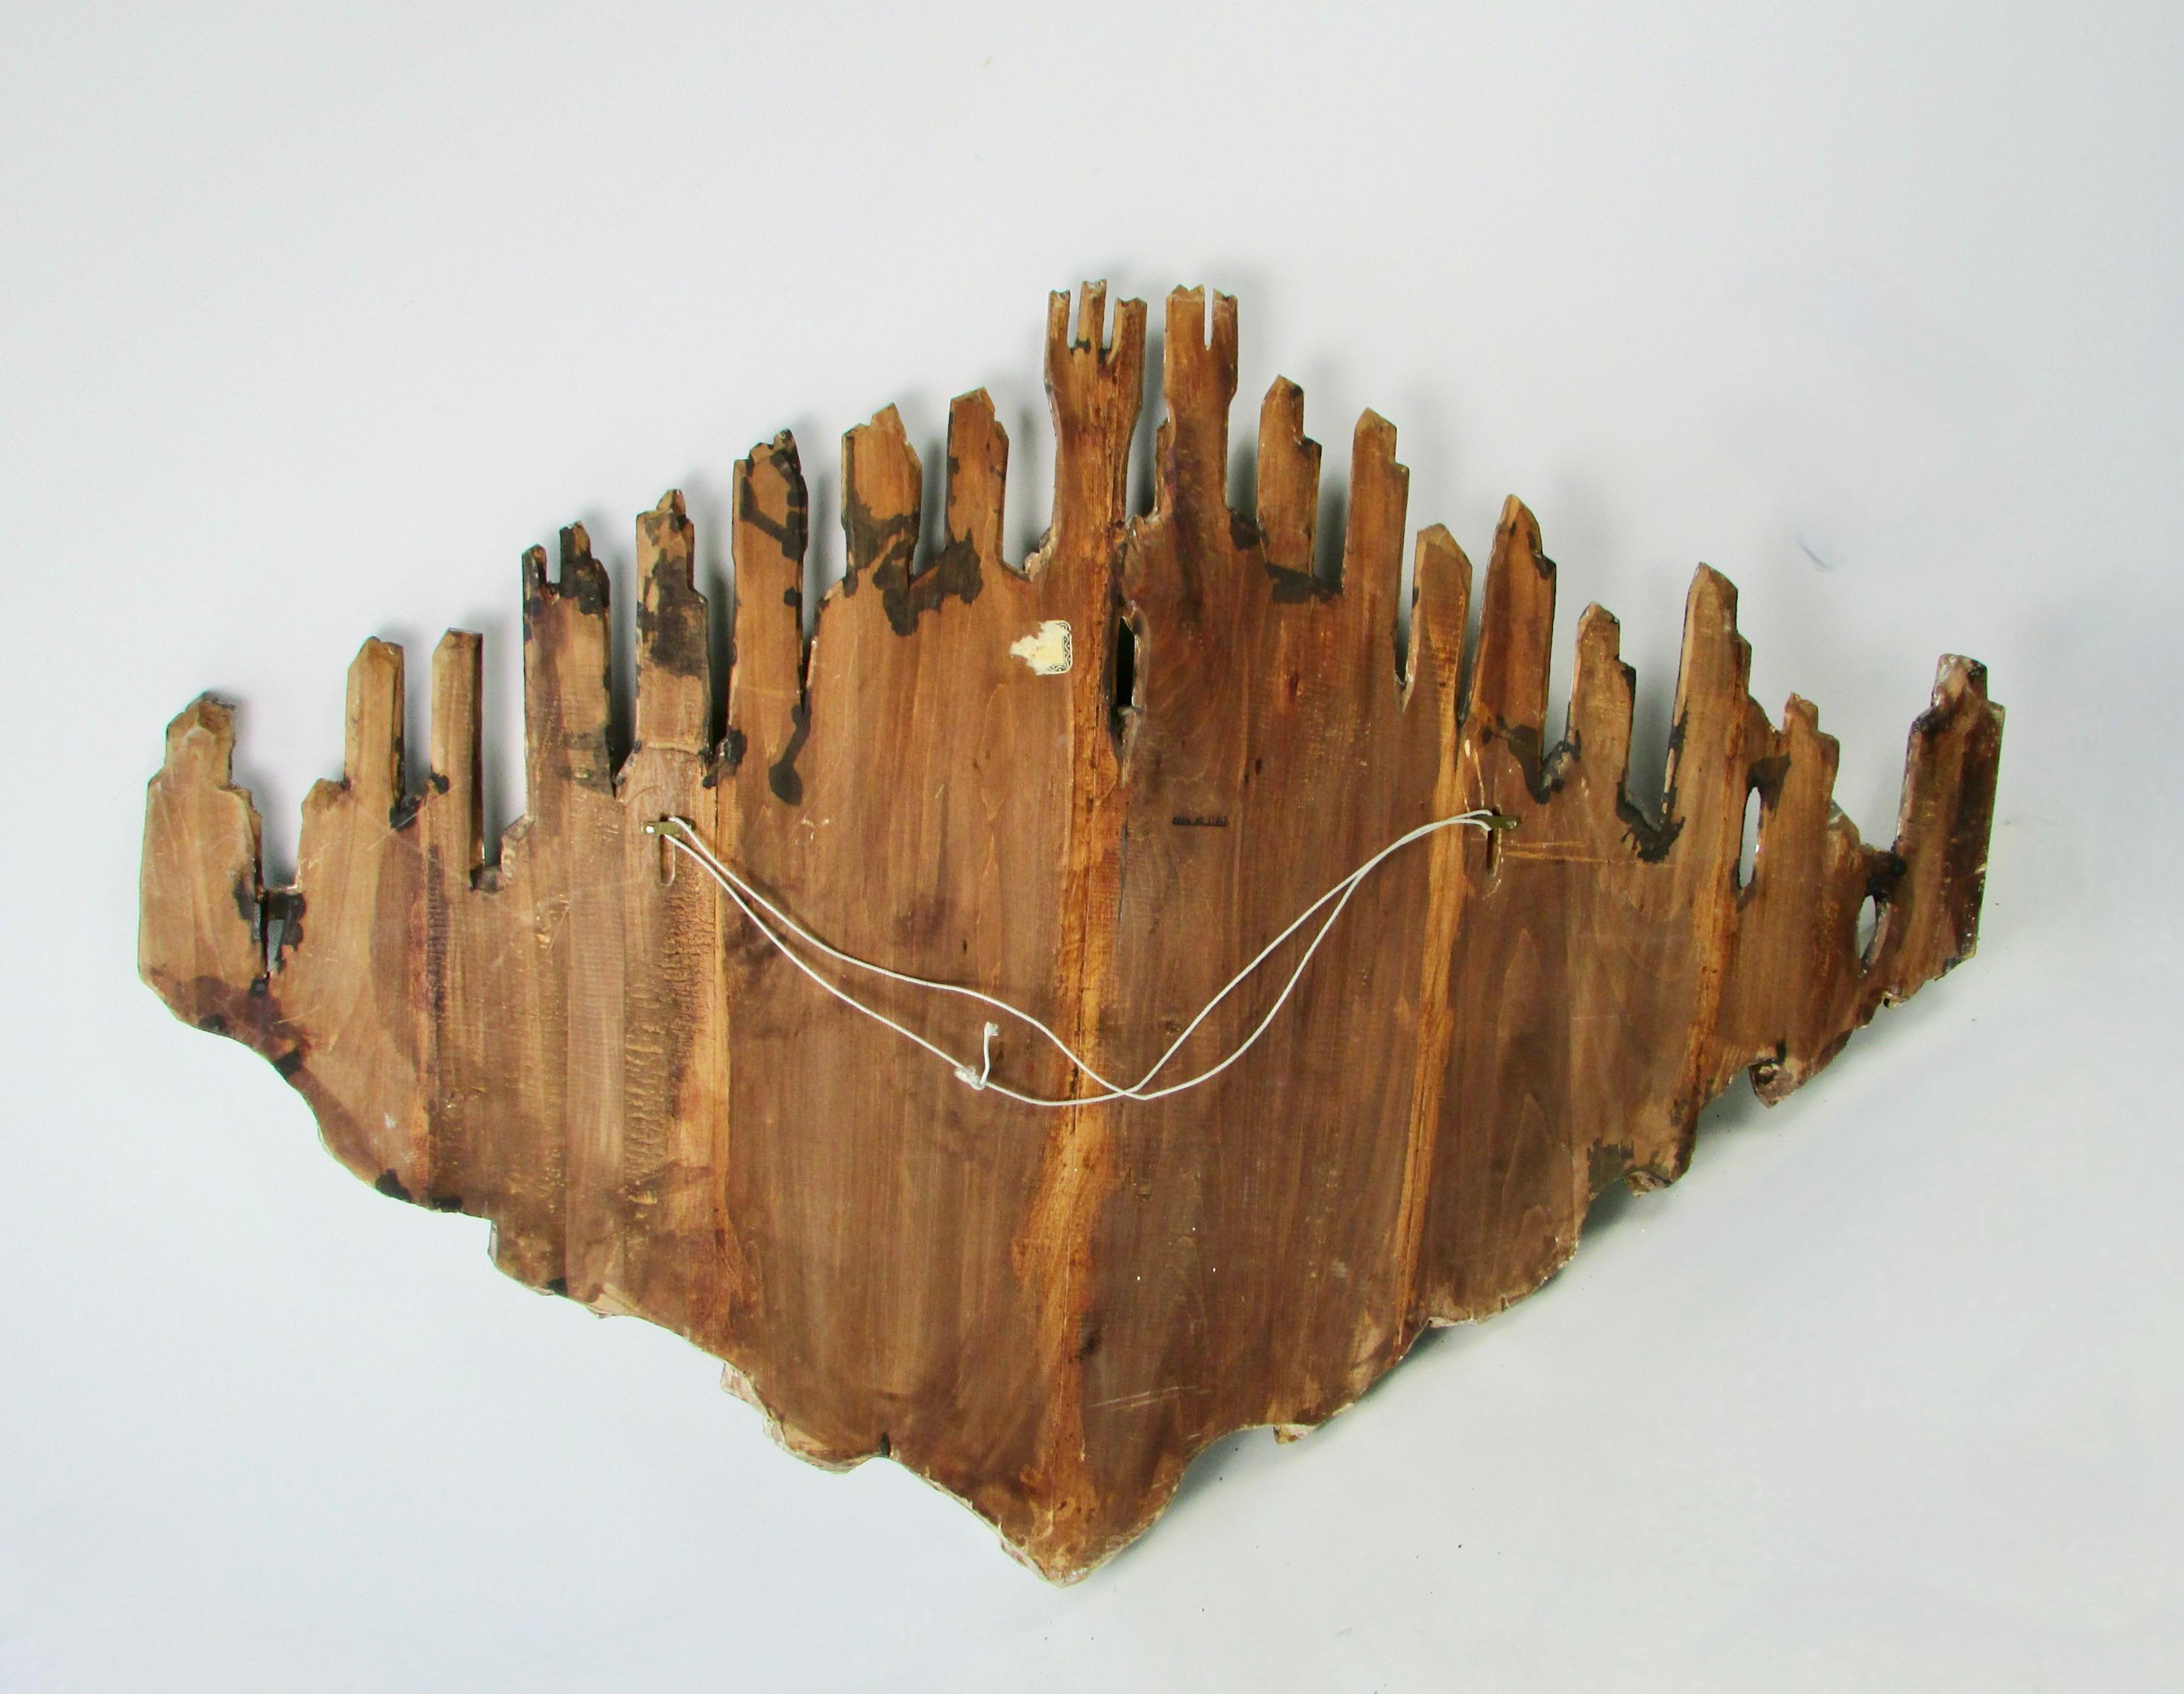 Wood Hand Carved Italian Wall Sculpture Depicting Medieval Turrets Towers and Castles For Sale